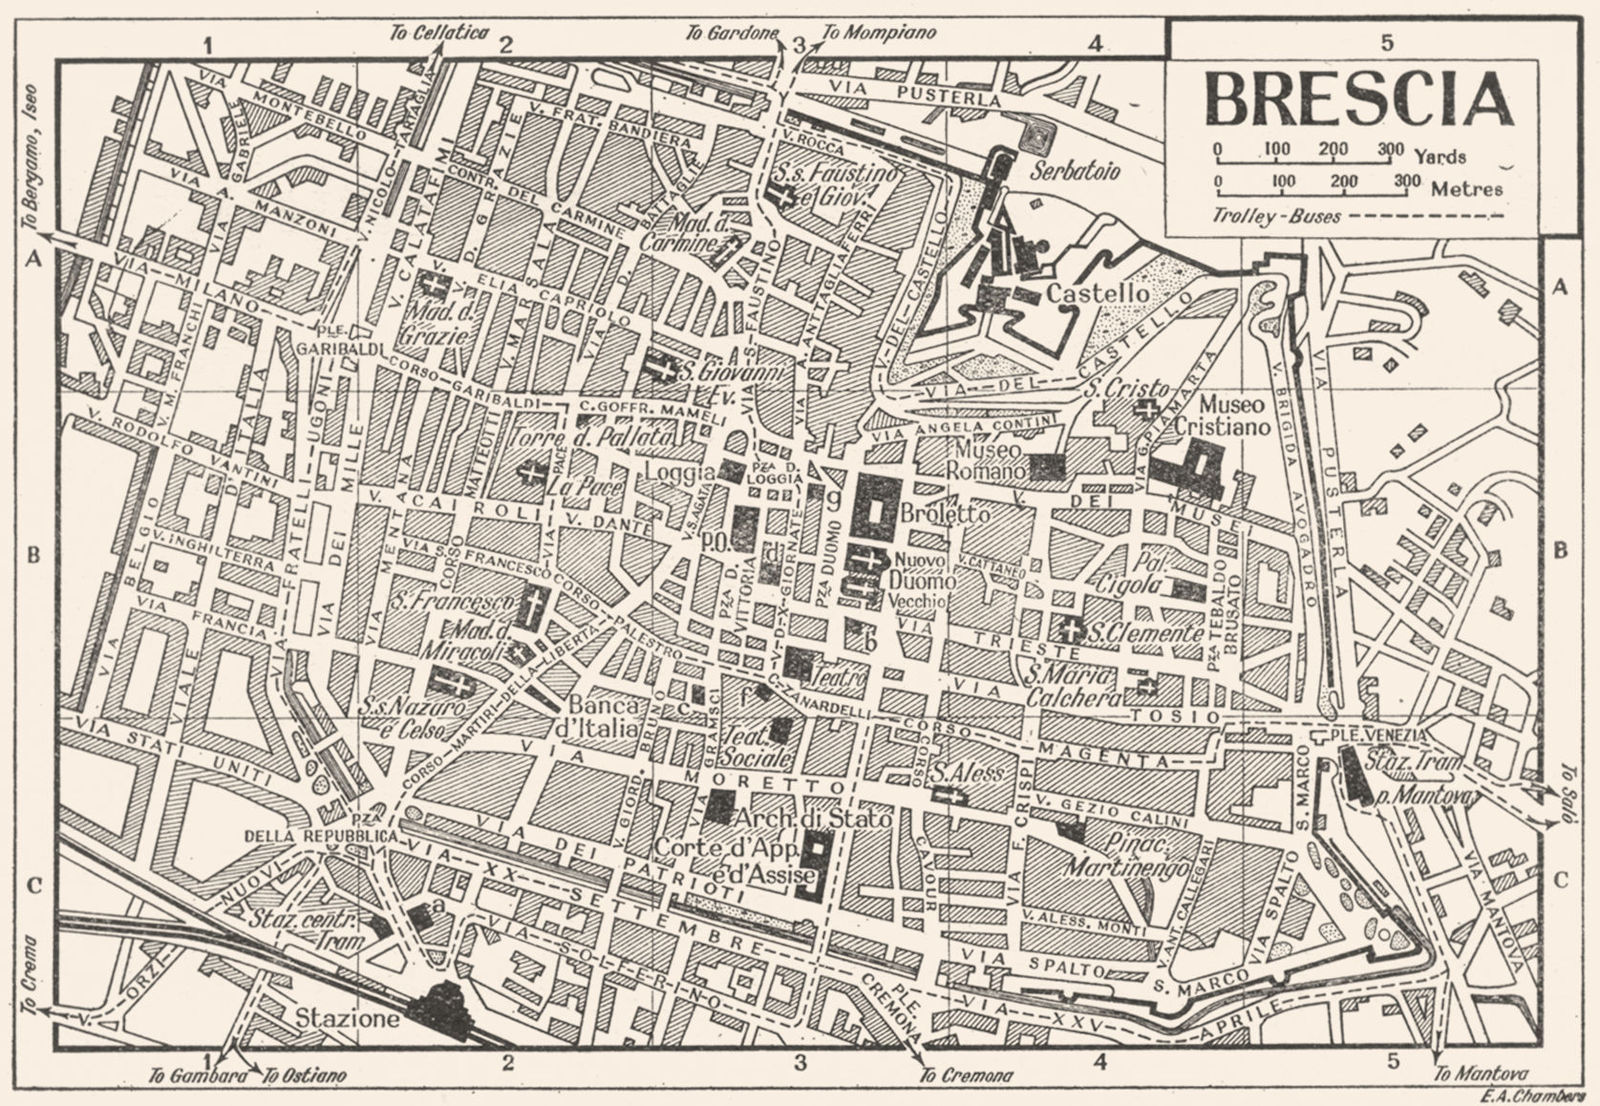 Associate Product BRESCIA town/city plan. Italy 1953 old vintage map chart